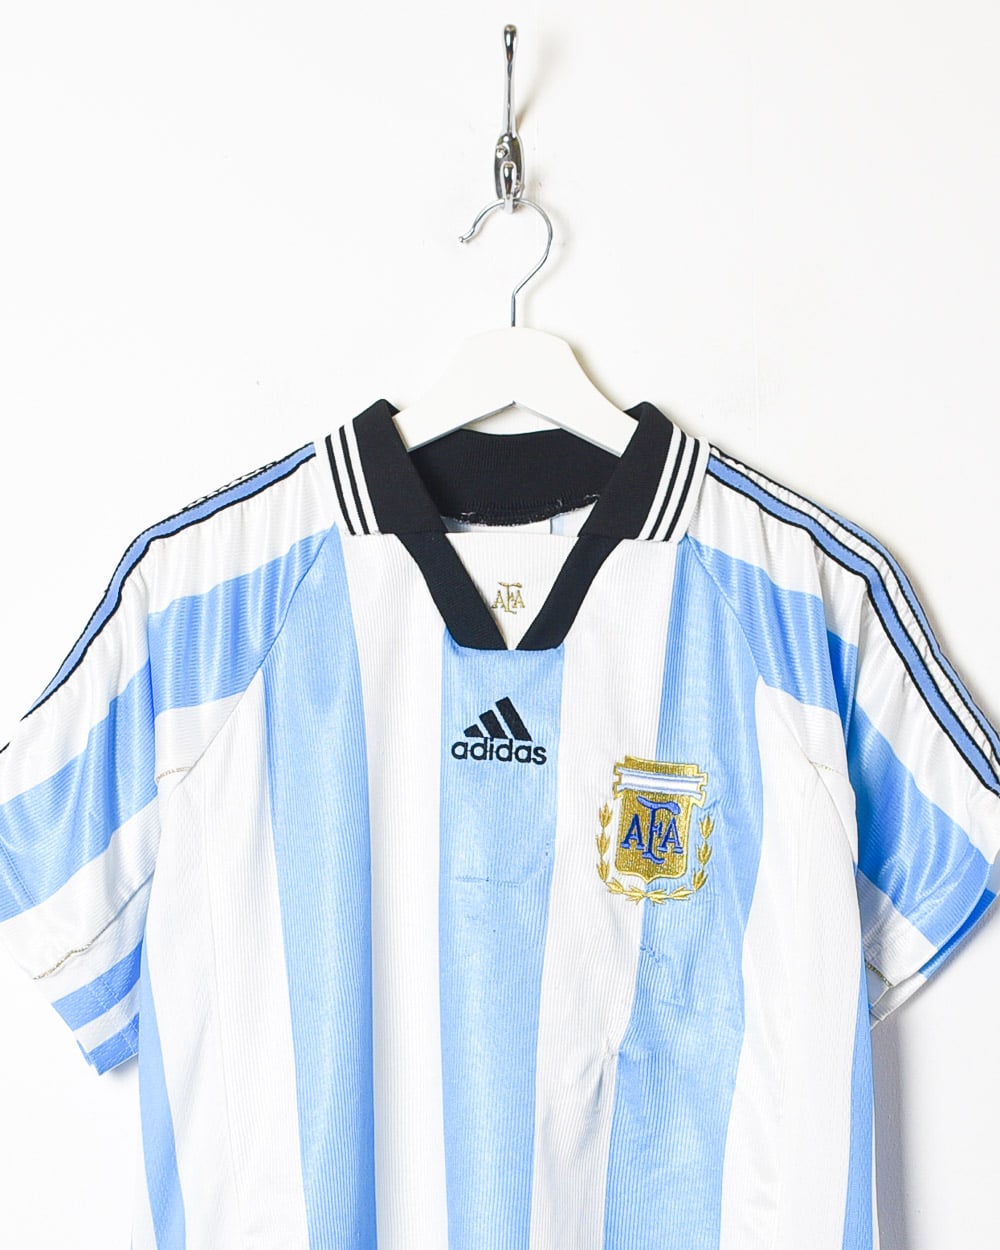 White Adidas Argentina 1998 World Cup Home Shirt - Small